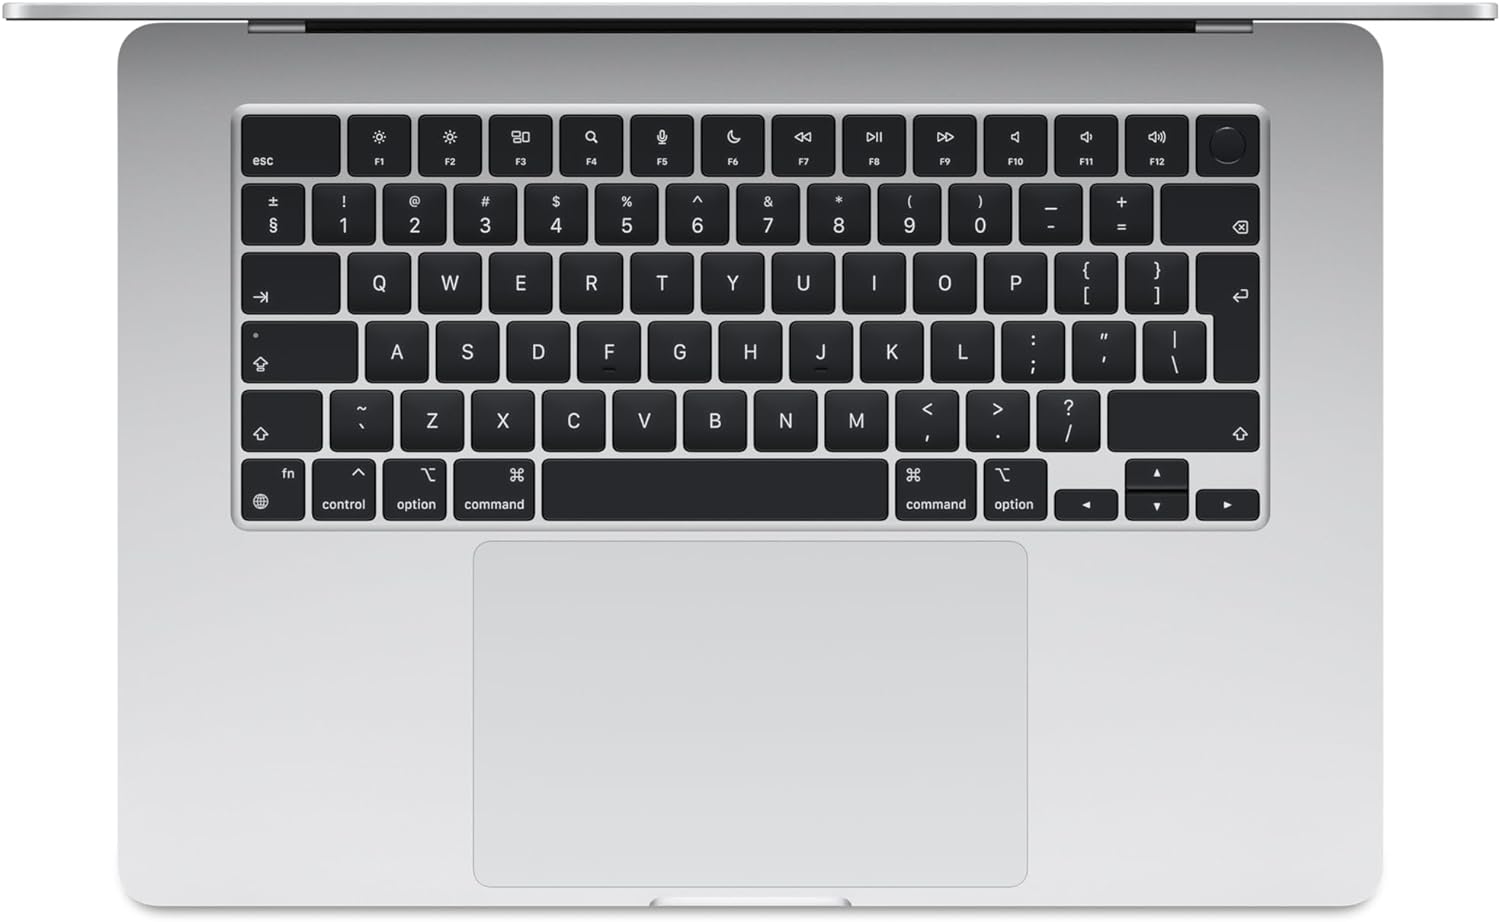 SKU: 0195949130038, Barcode: 195949130038 - Apple 2024 MacBook Air - Lightweight and ultra-thin design for portability on the go.